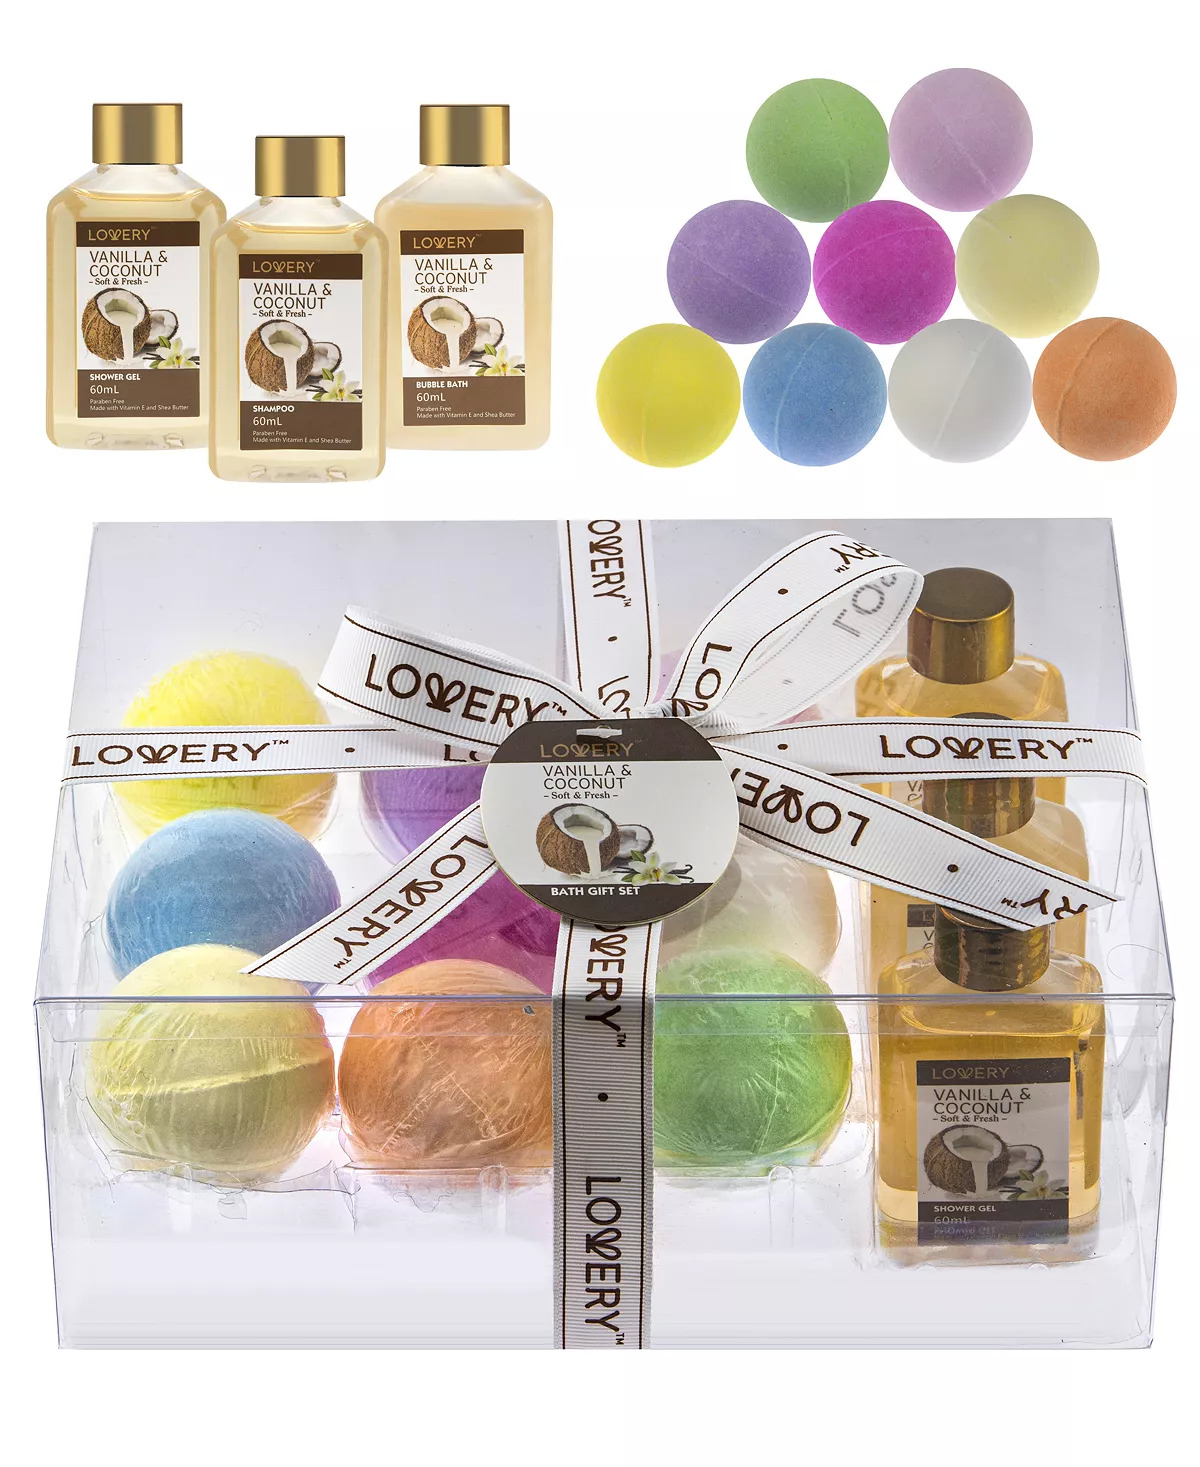 Select Lovery Gift Sets from $25.20 & More + Free Store Pickup at Macy's or F/S on Orders $25+